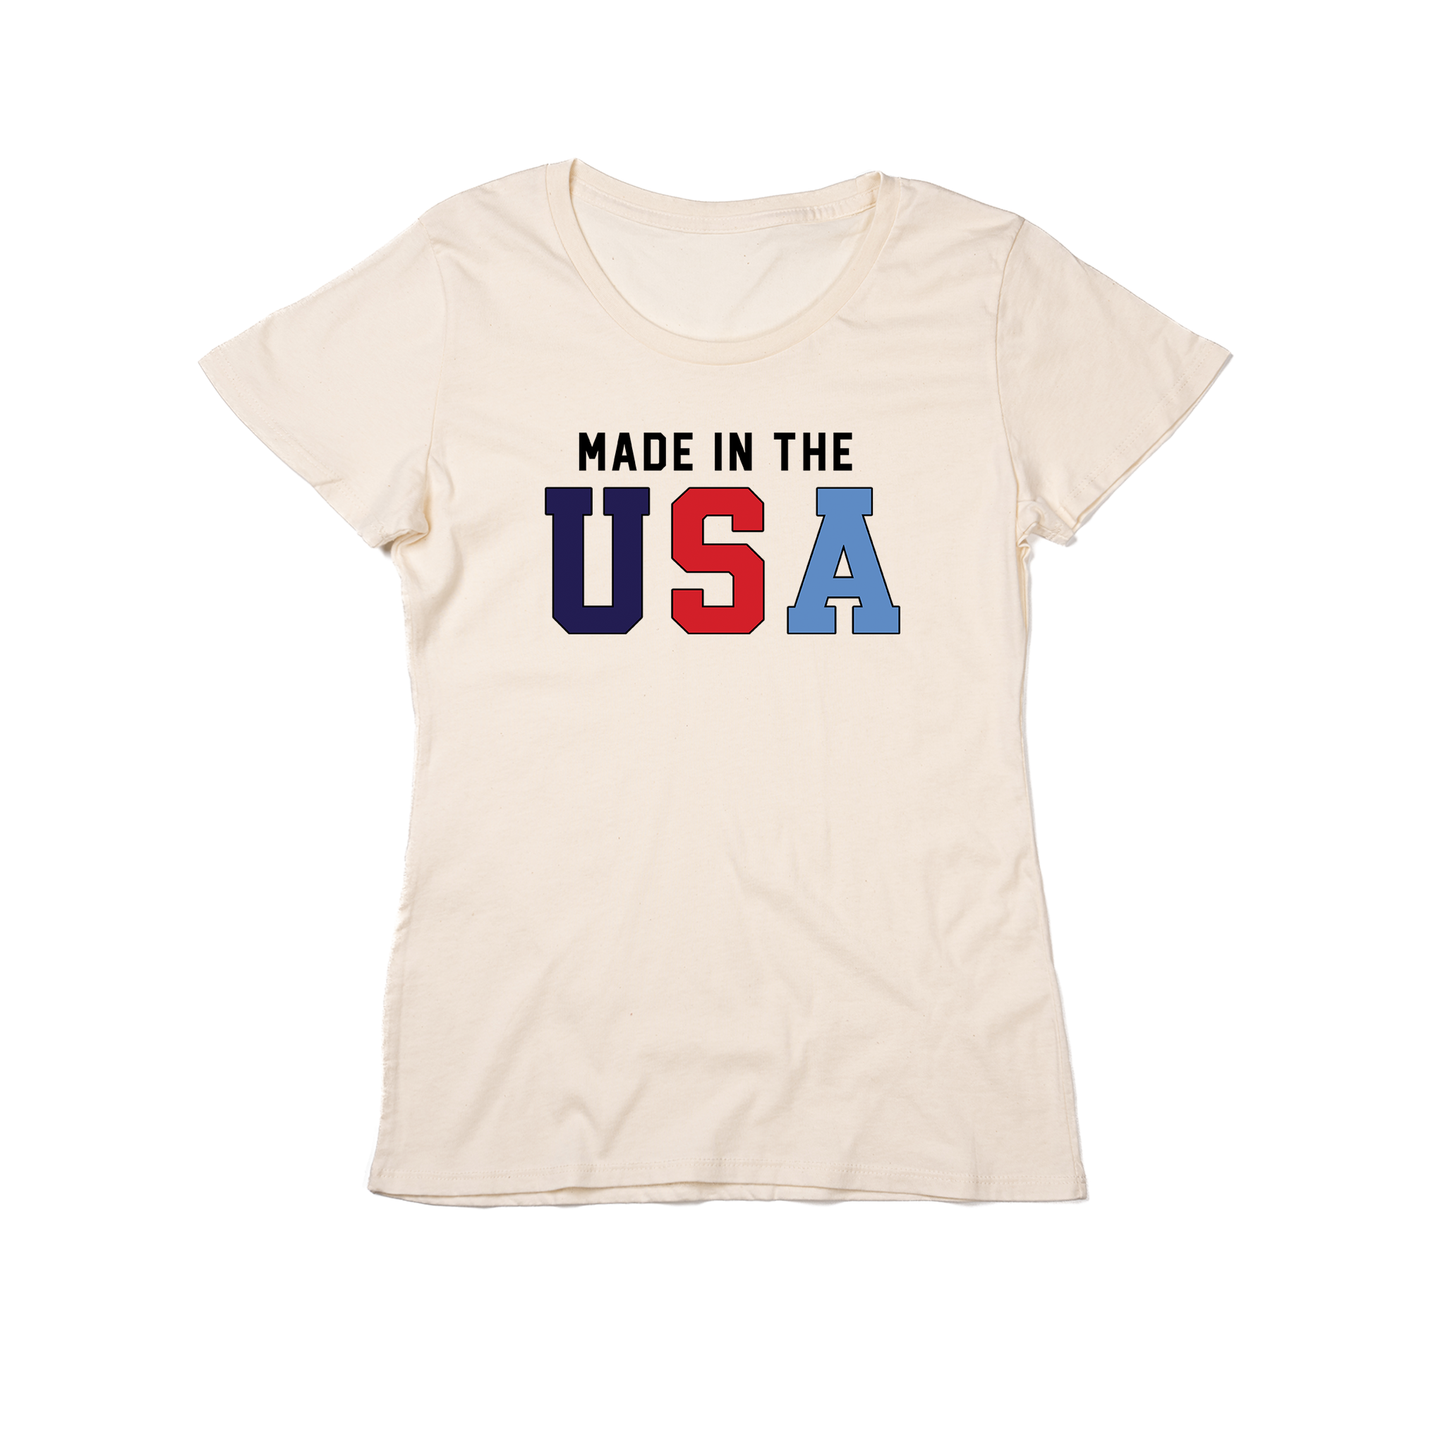 Made in the USA - Women's Fitted Tee (Natural)